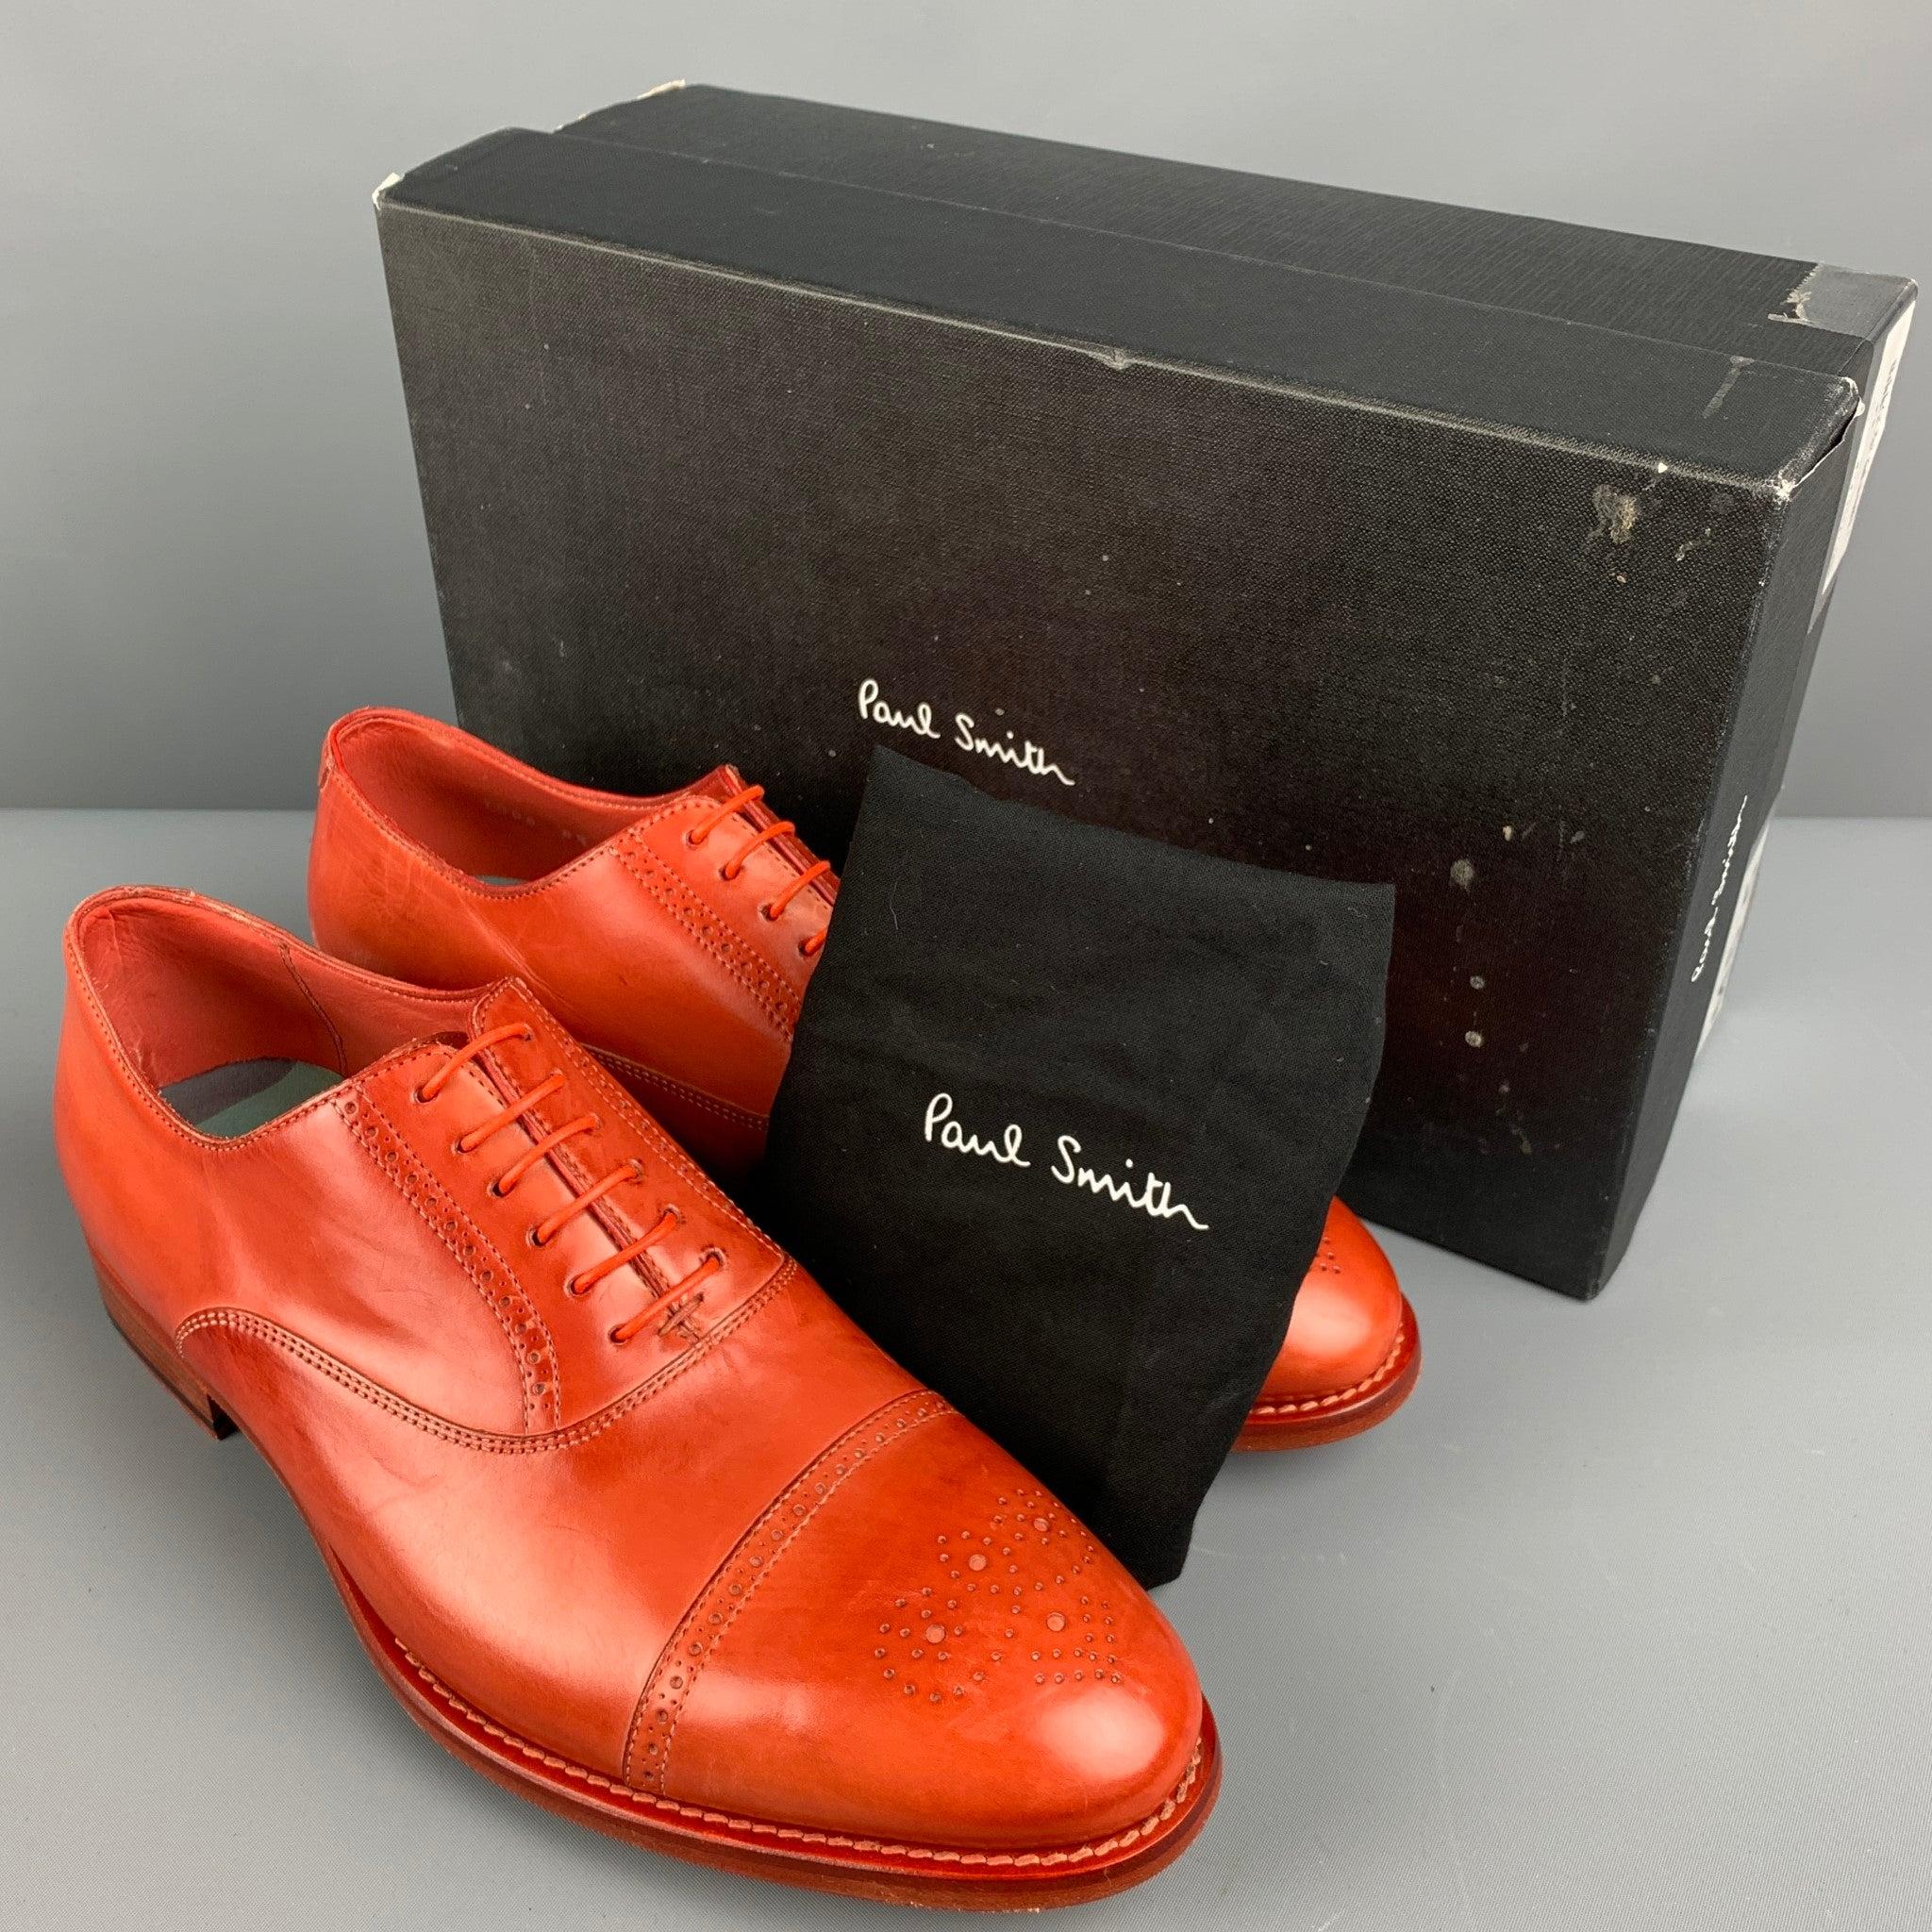 PAUL SMITH Size 8.5 Orange Perforated Leather Cap Toe Lace Up Shoes For Sale 5